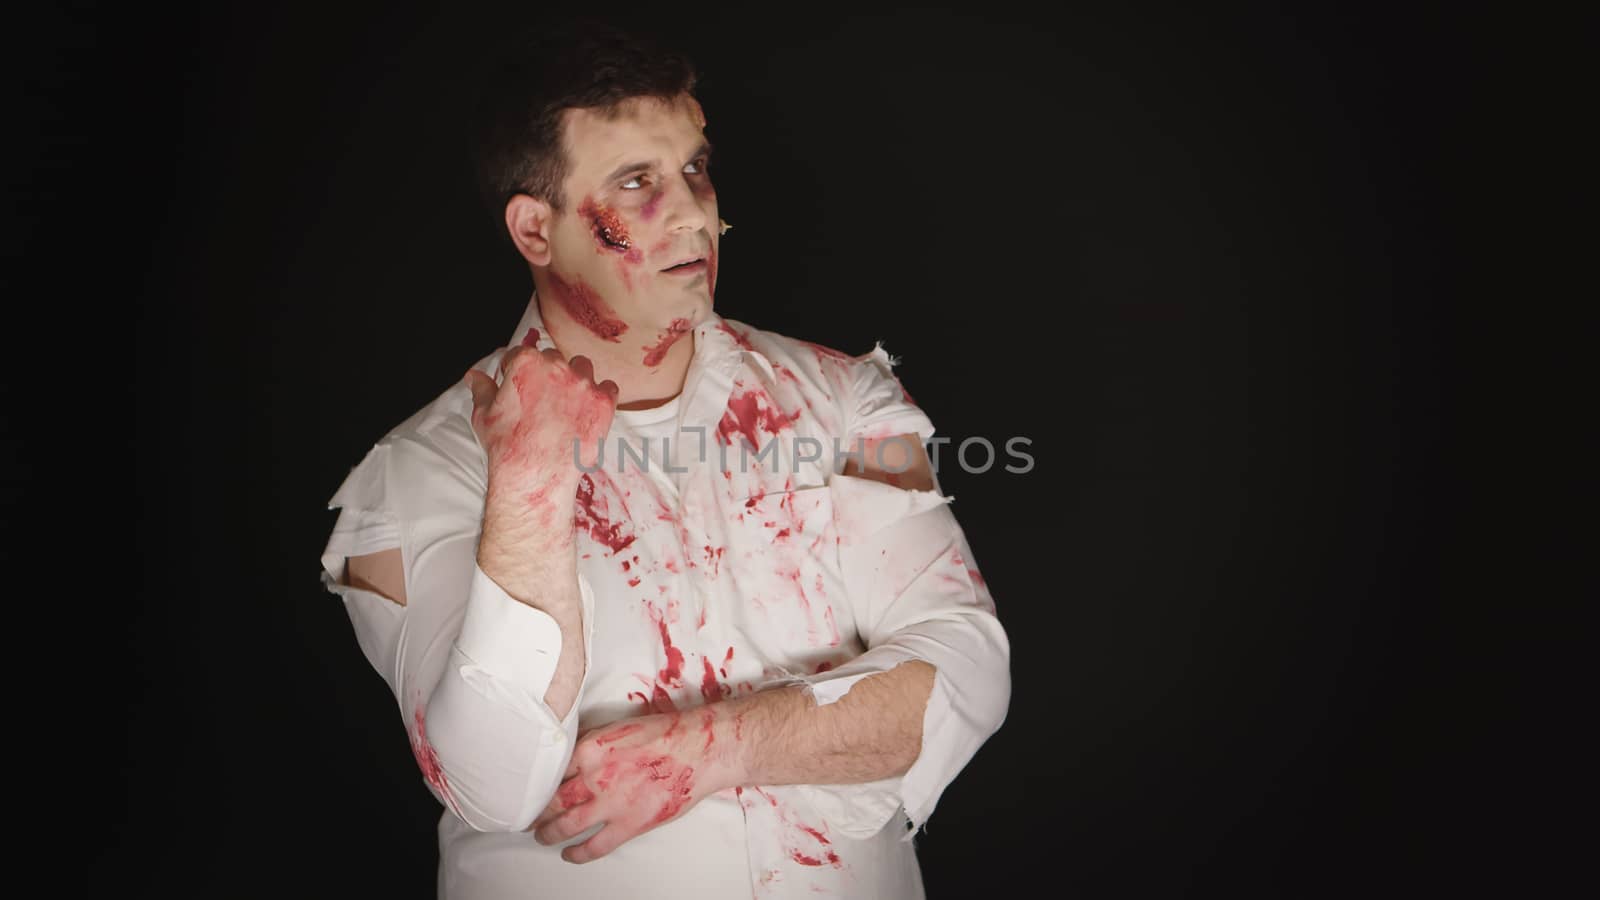 Young man with blood on his face dressed up like a zombie for halloween.